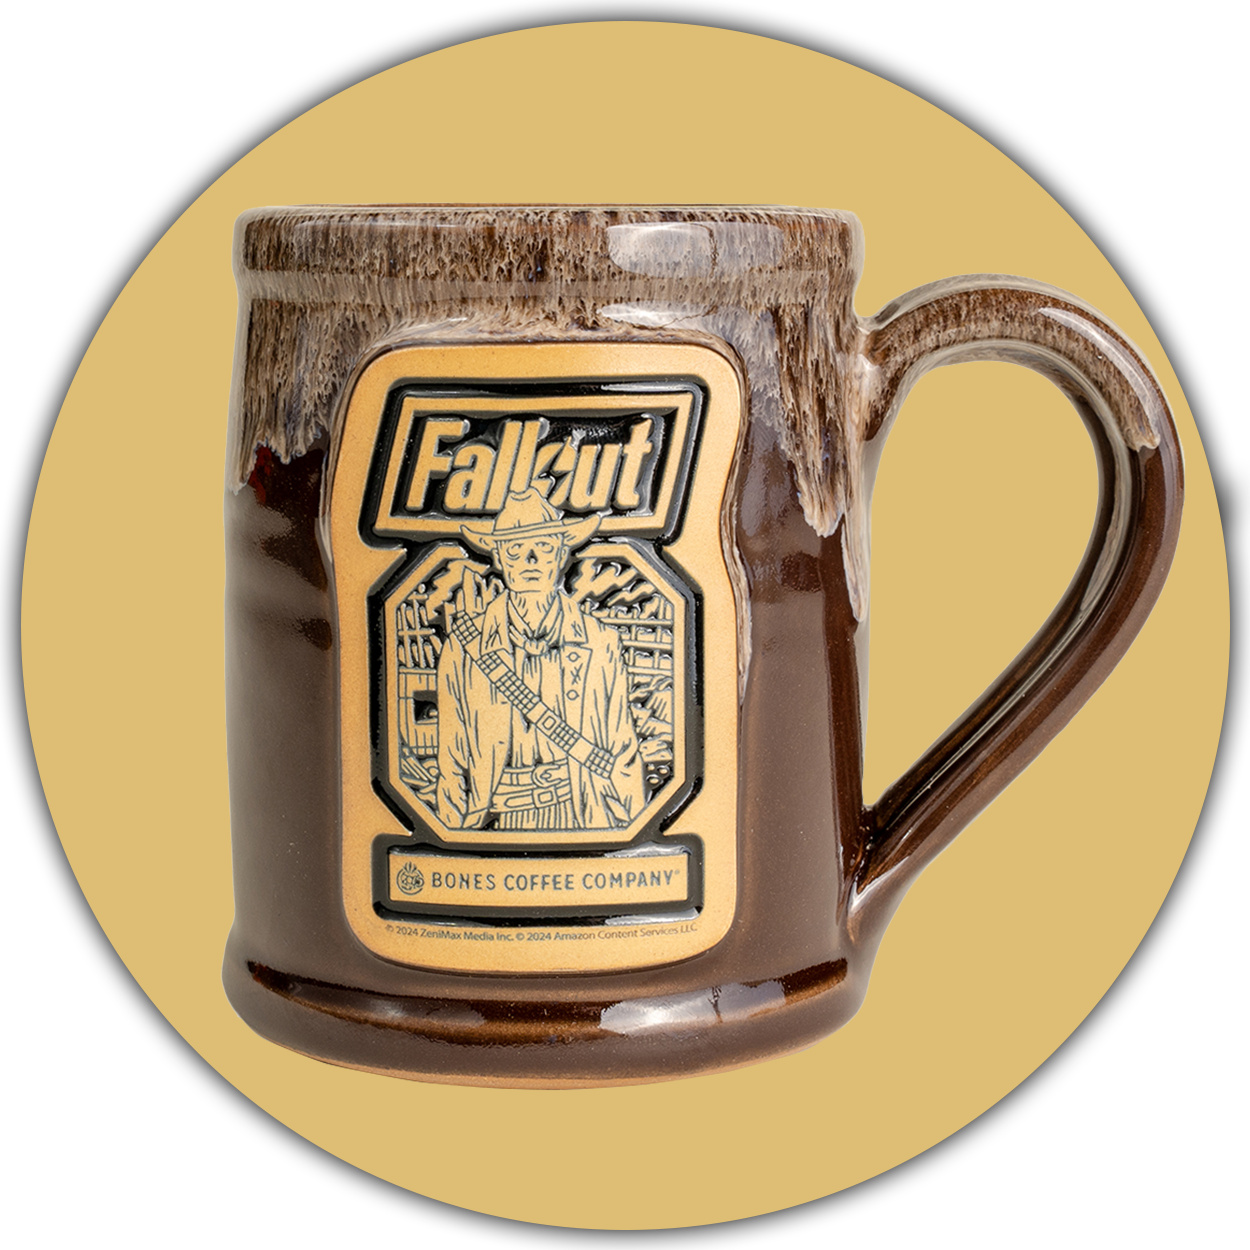 The front of the Bones Coffee Company Ghoul hand thrown mug with the Wasteland Crunch art on the golden medallion. It is inspired by Zenimax and Amazon’s Fallout show. The mug is chocolate colored with a sand white glaze on top. A light brown circle is behind it.